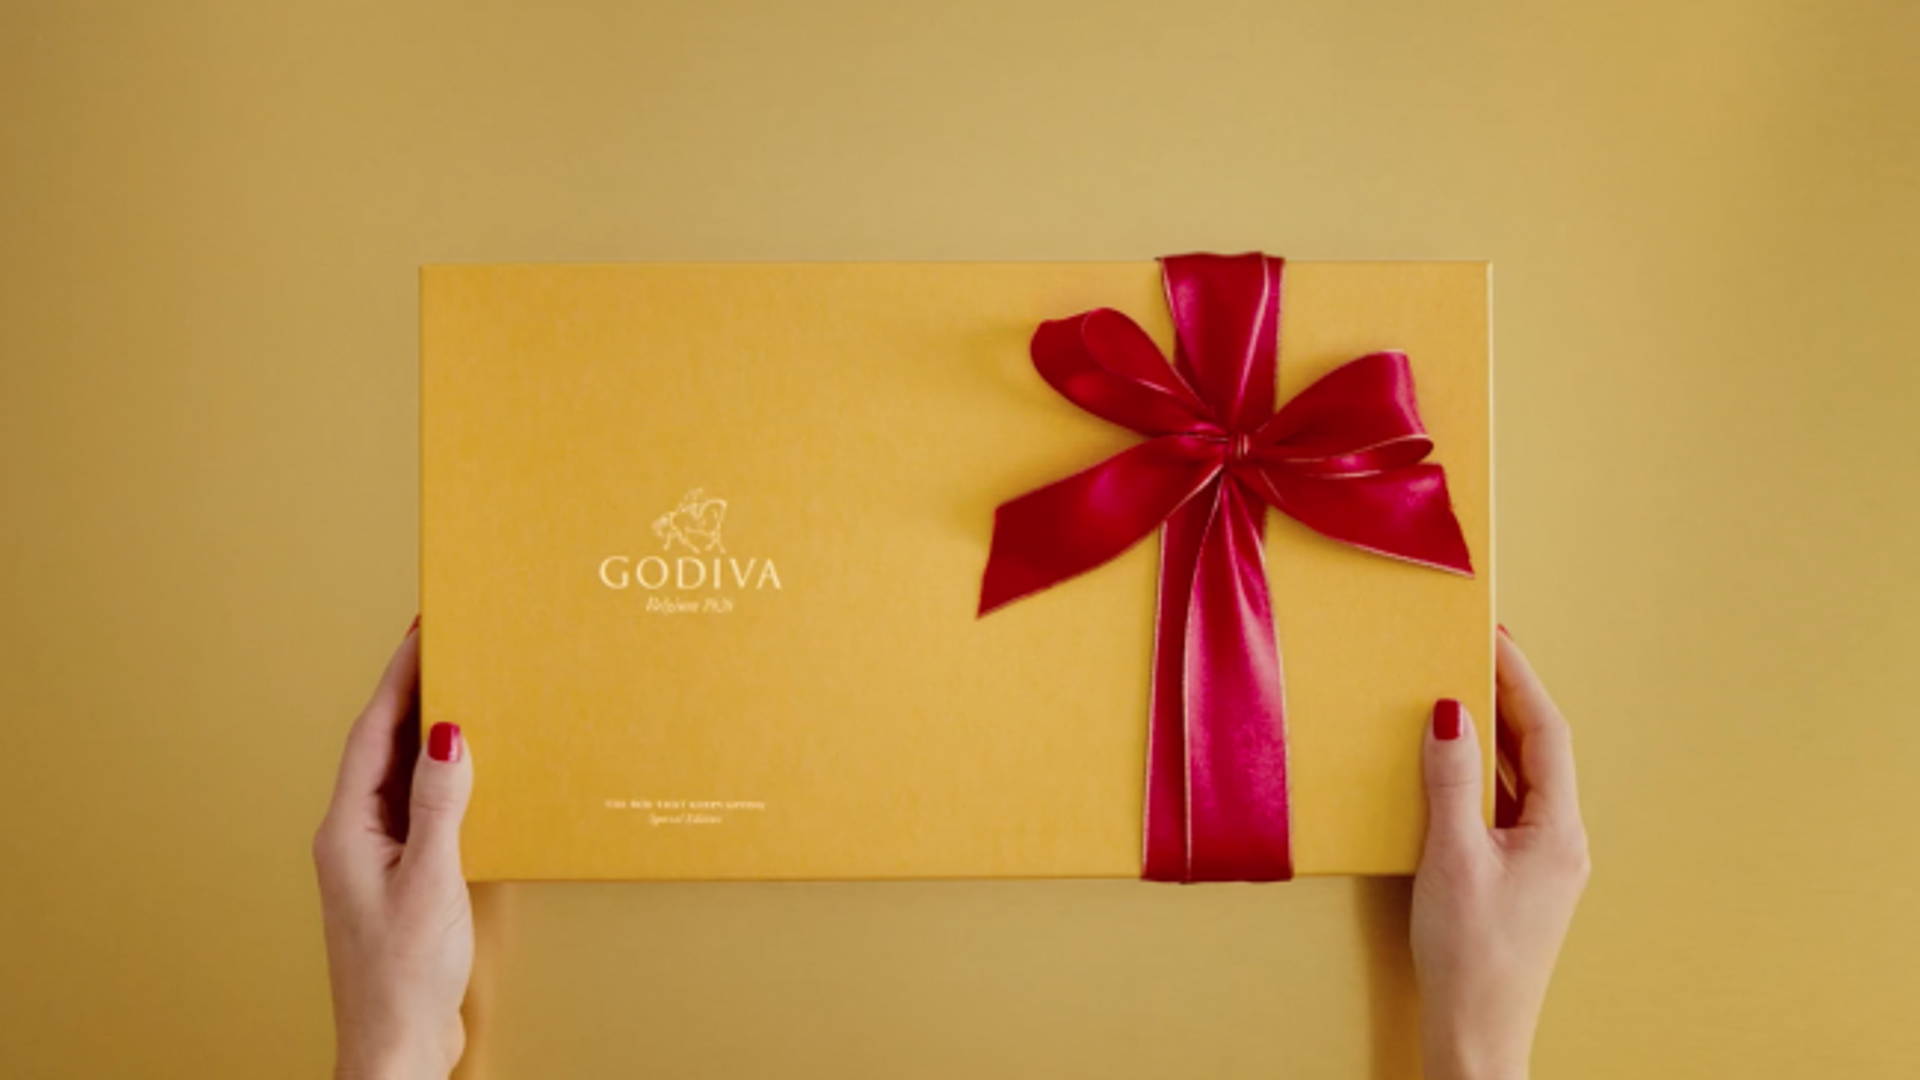 Featured image for Godiva's New Chocolate Box includes a sharable packaging aspect